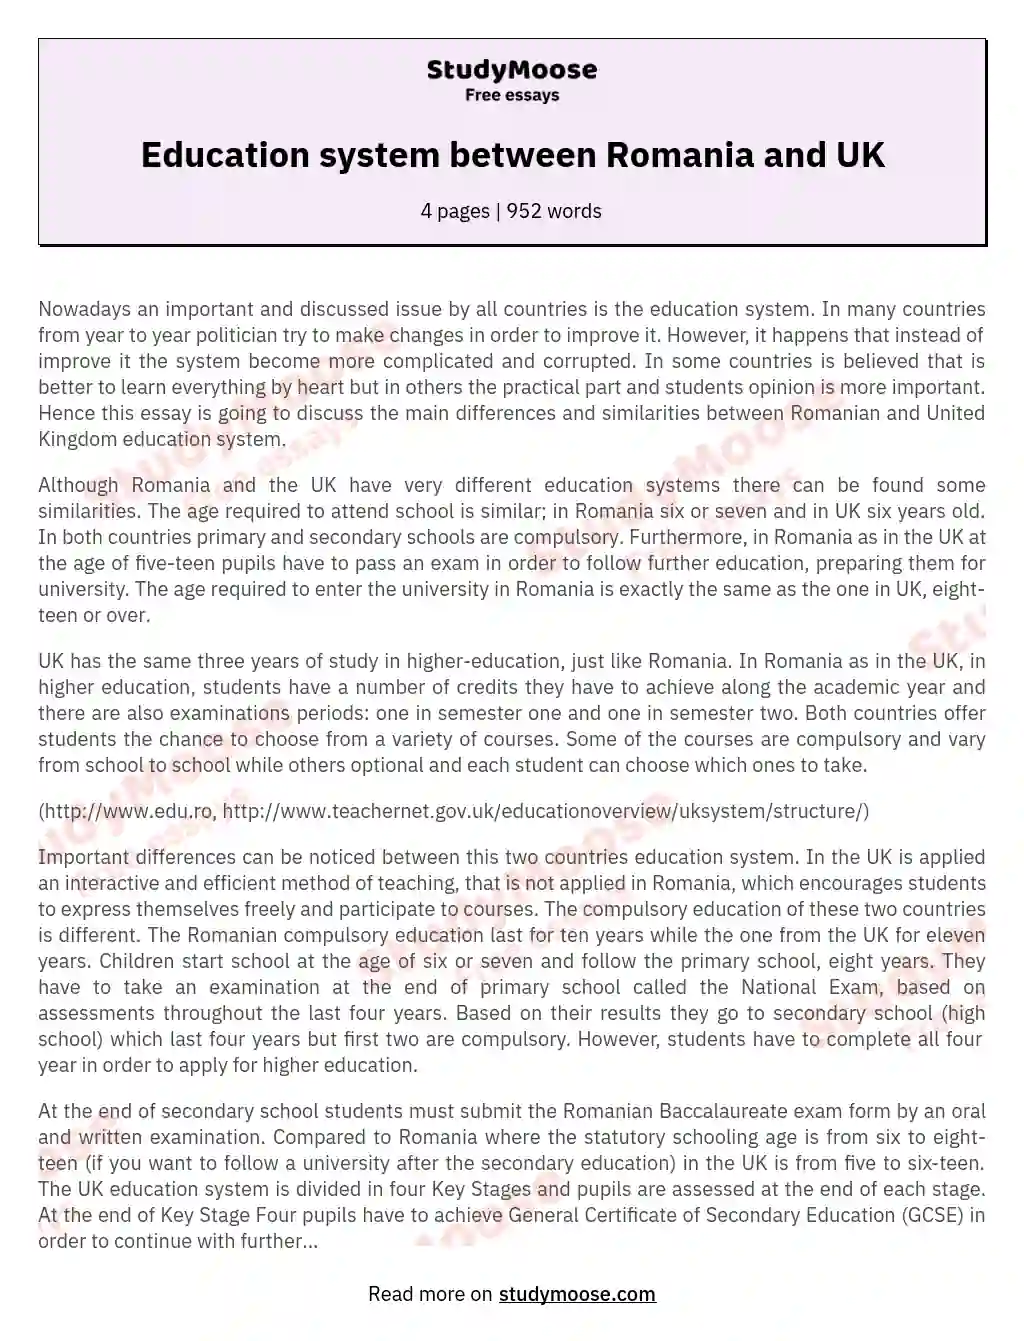 Education system between Romania and UK essay